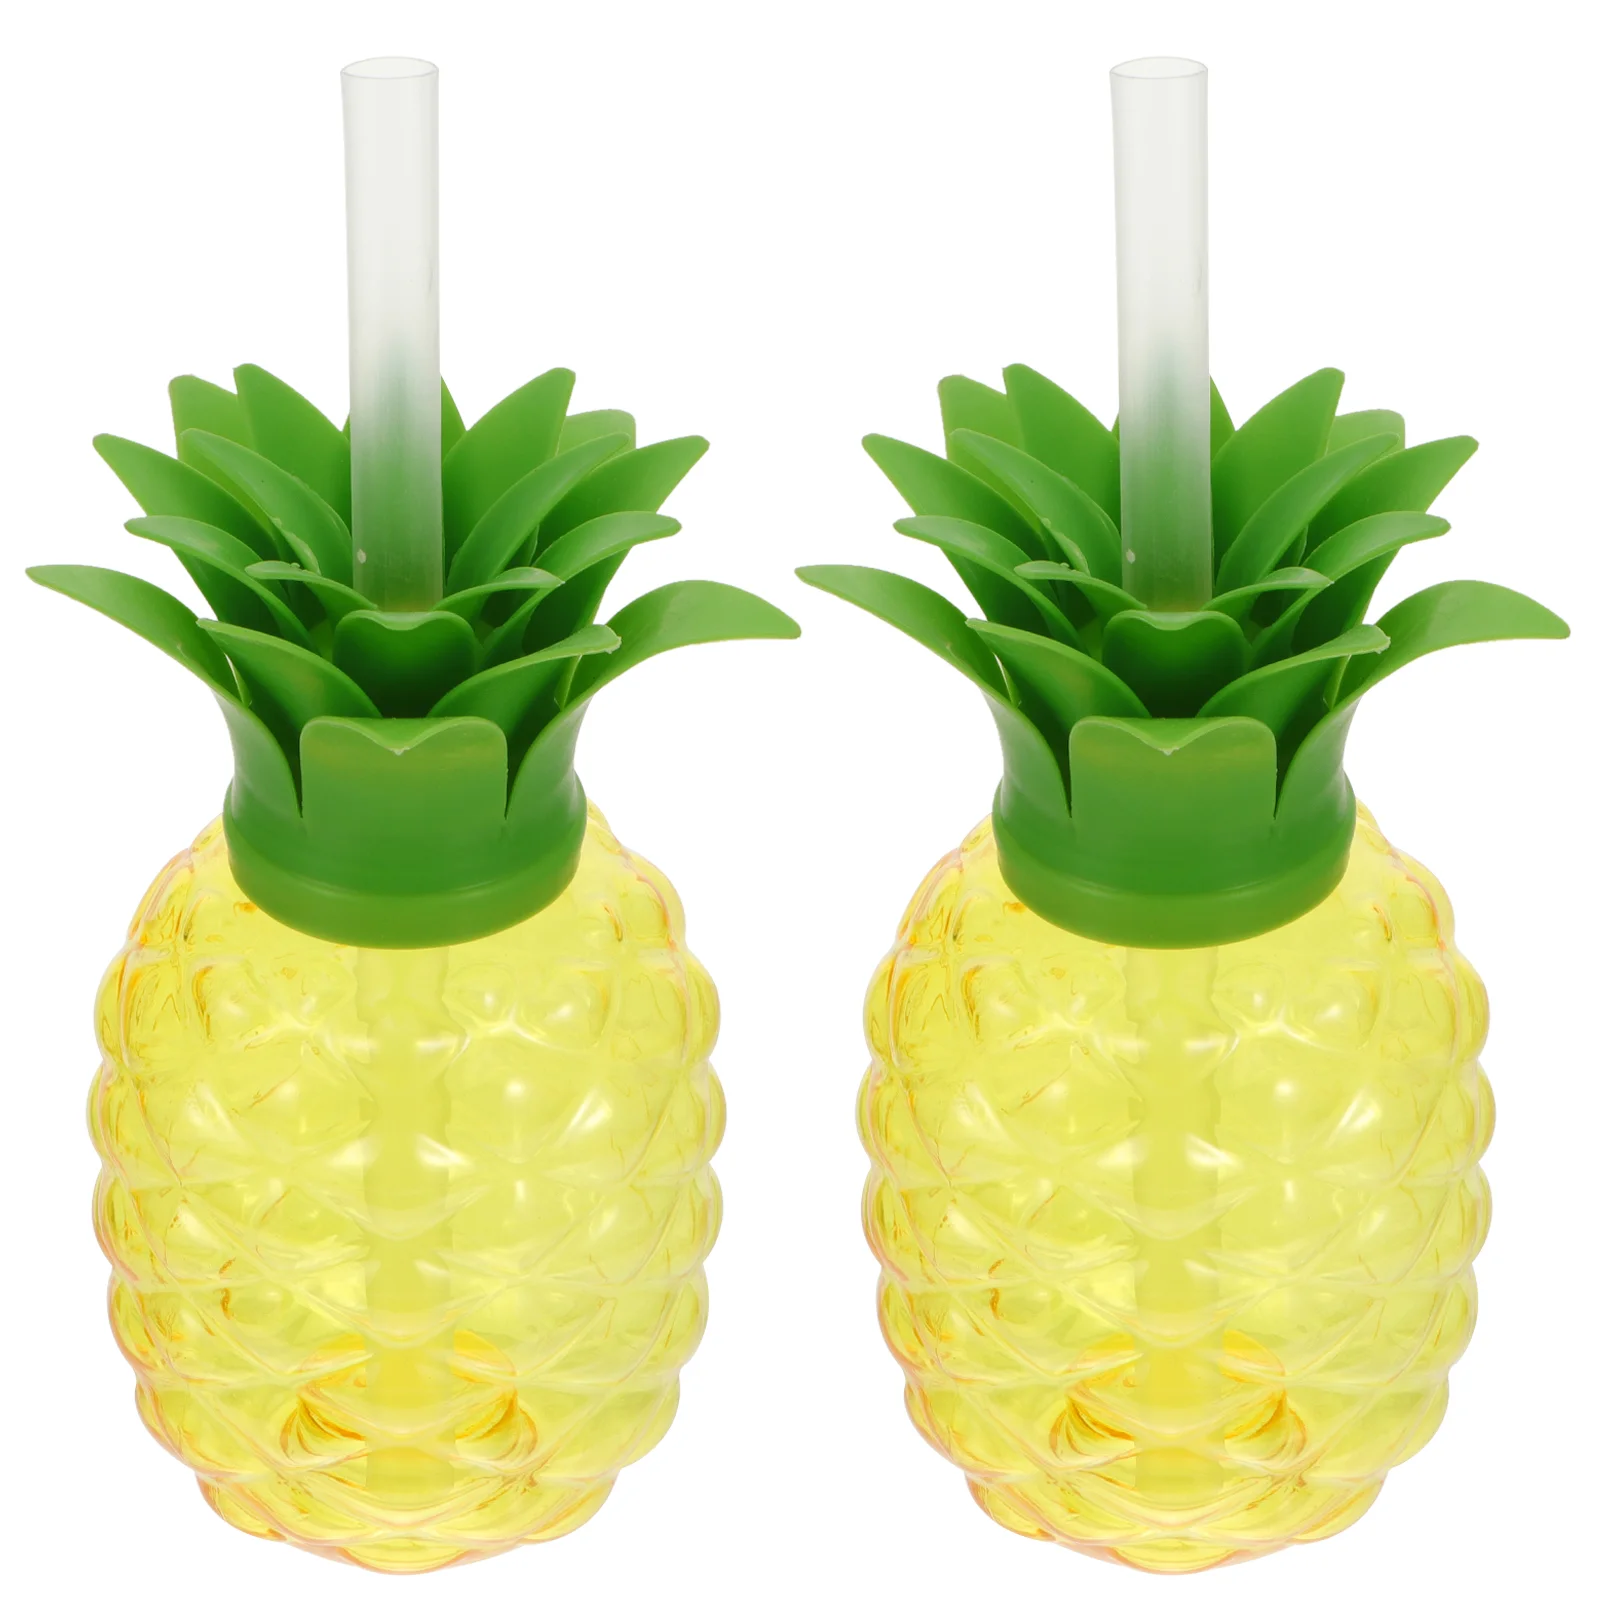 

Cups Pineapple Party Cup Hawaiian Straws Plastic Drinking Drink Lids Beach Straw Tumbler Summer Kids Decorations Supplies